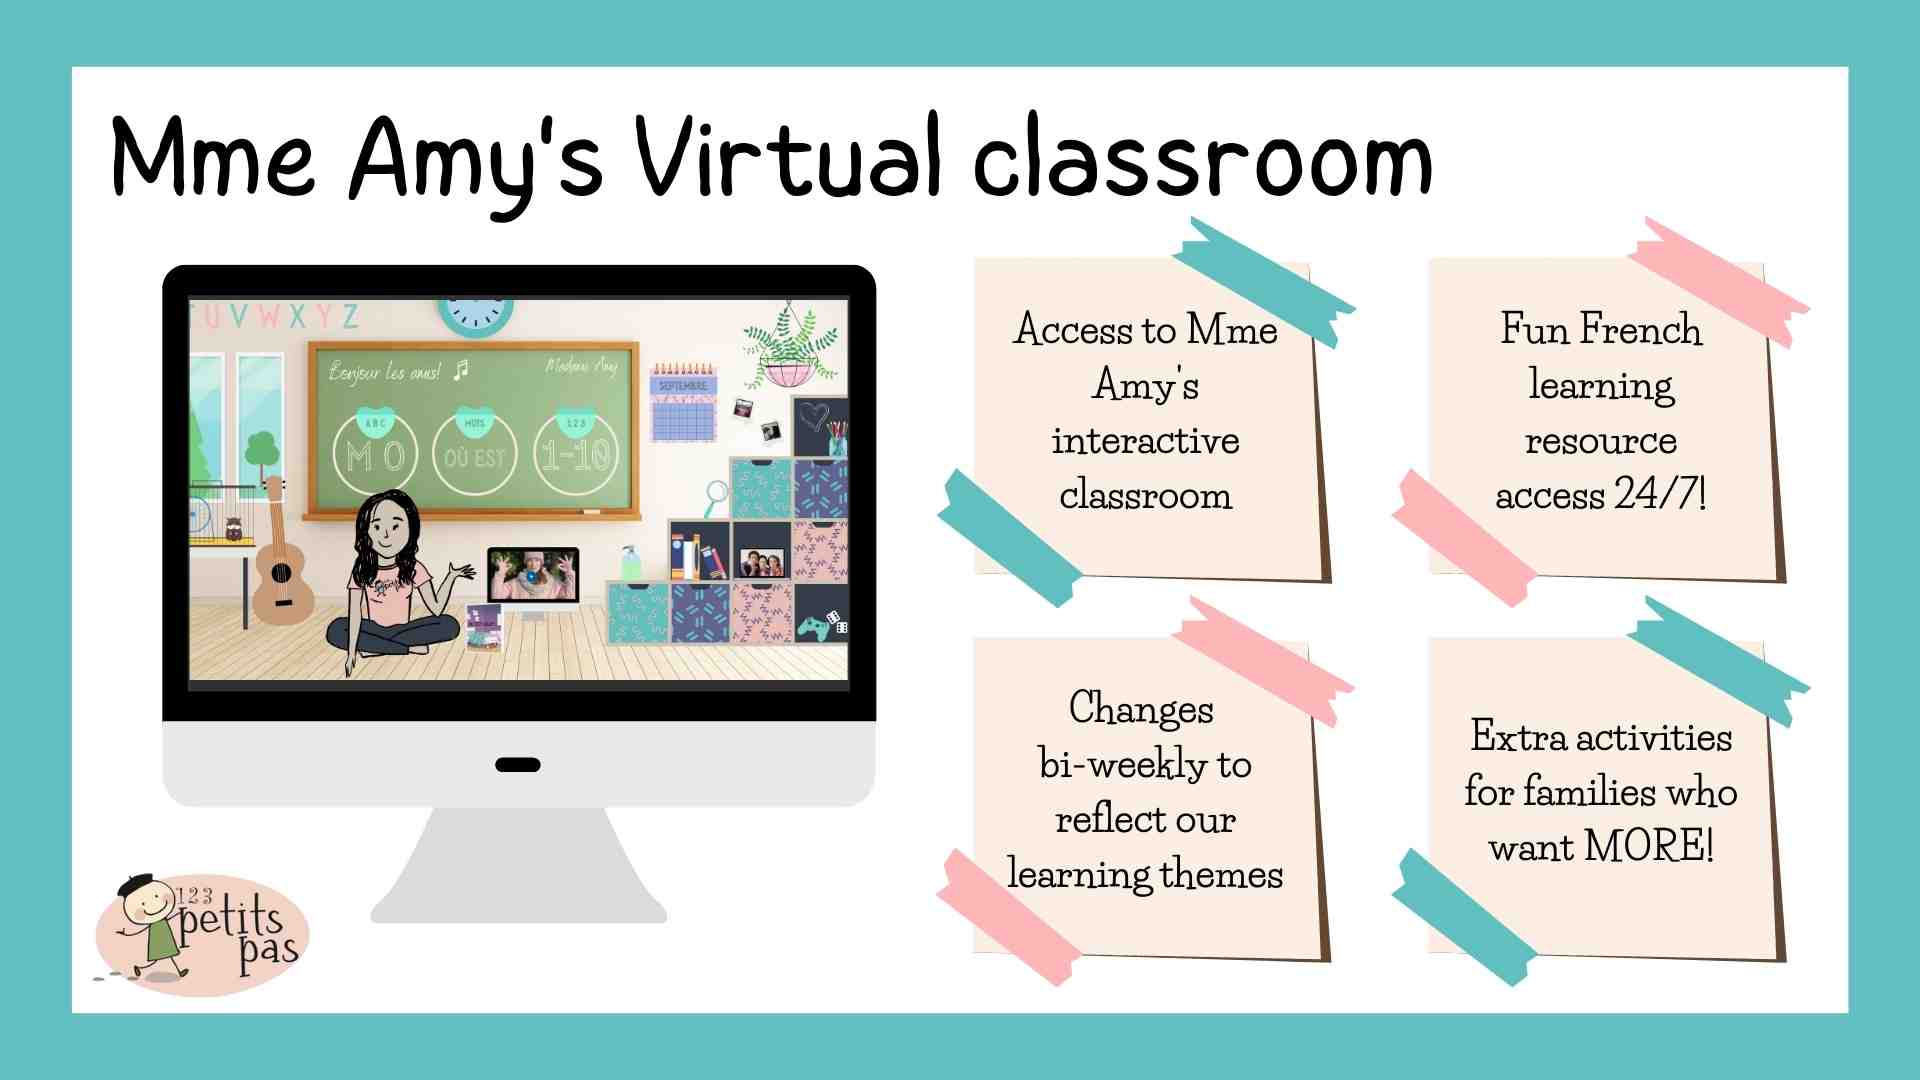 Mme Amy's Virtual French Classroom is for families who want more French practice